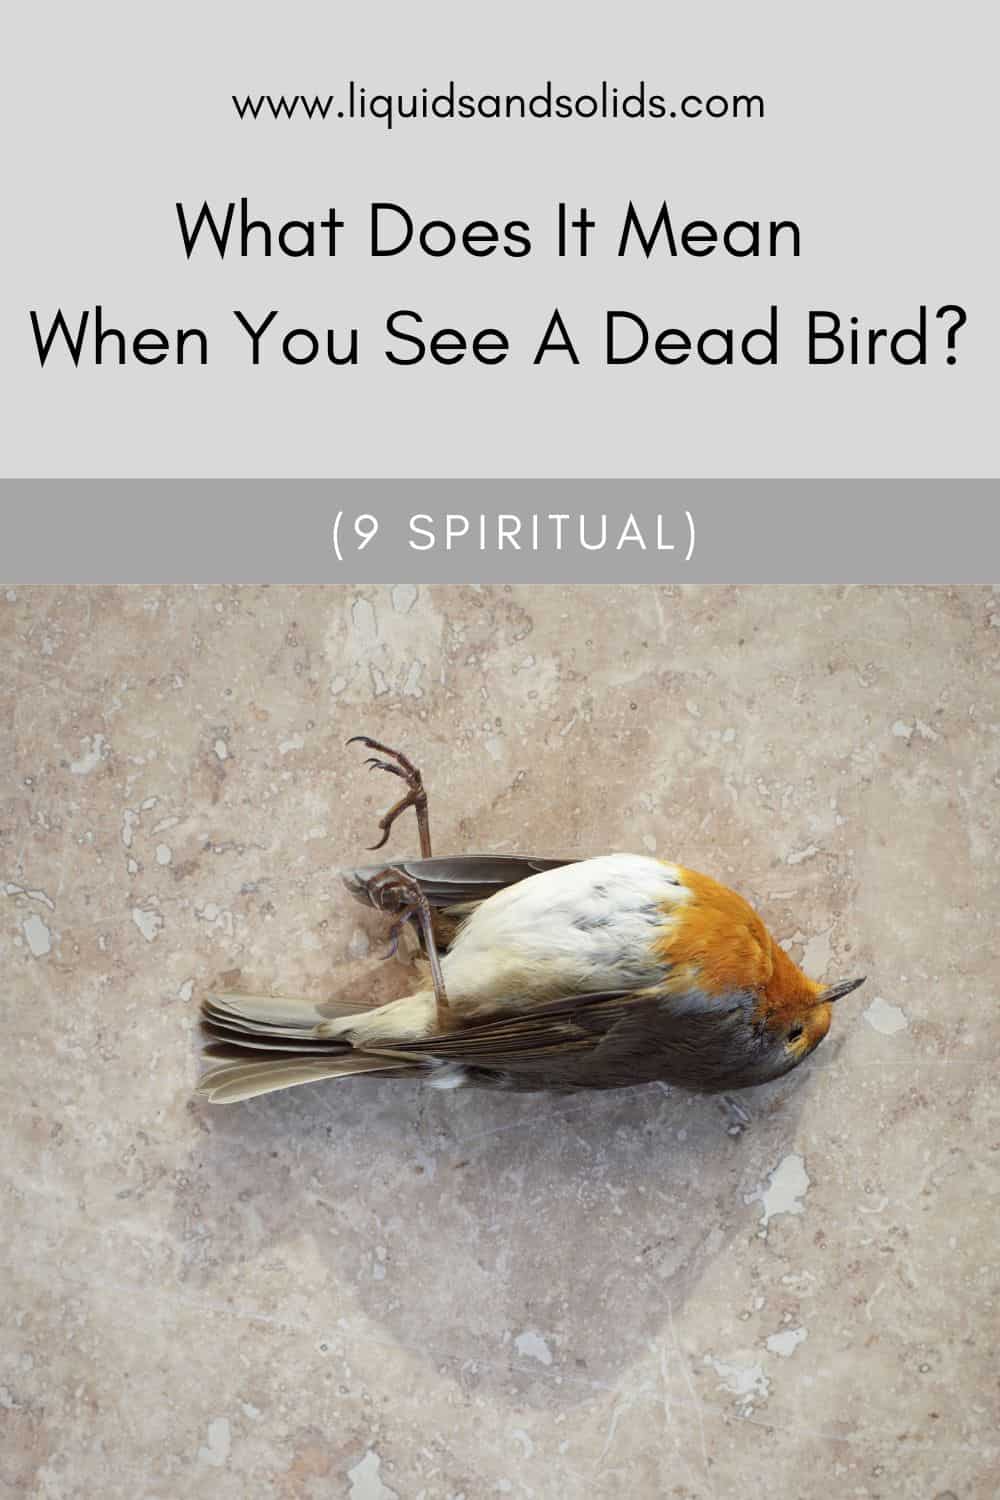 What Does It Mean When You See A Dead Bird? (9 Spiritual)